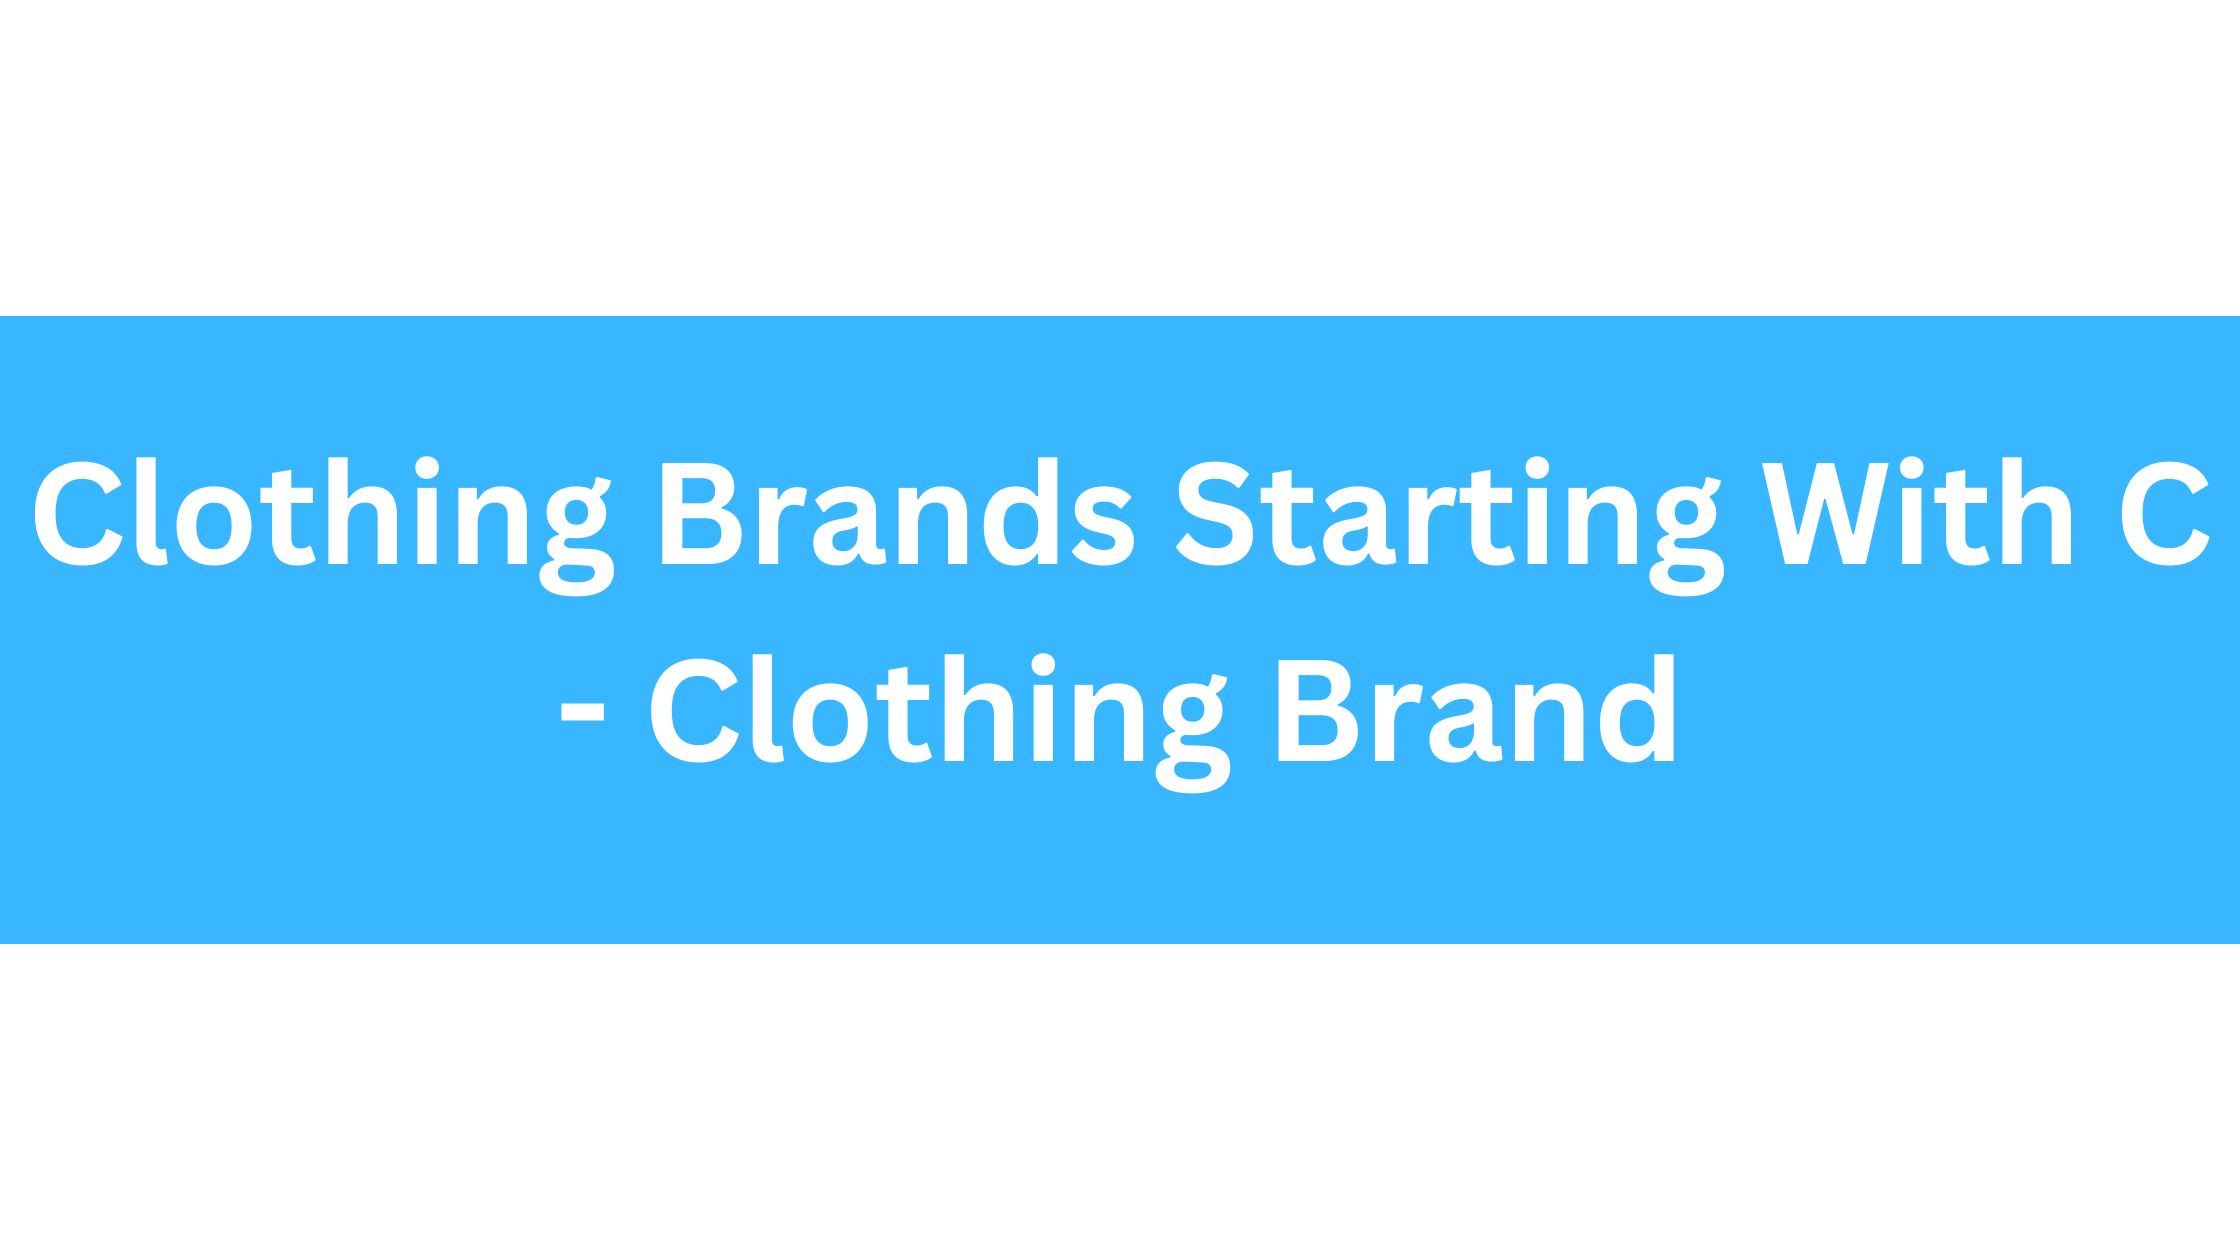 Clothing Brands Starting With C